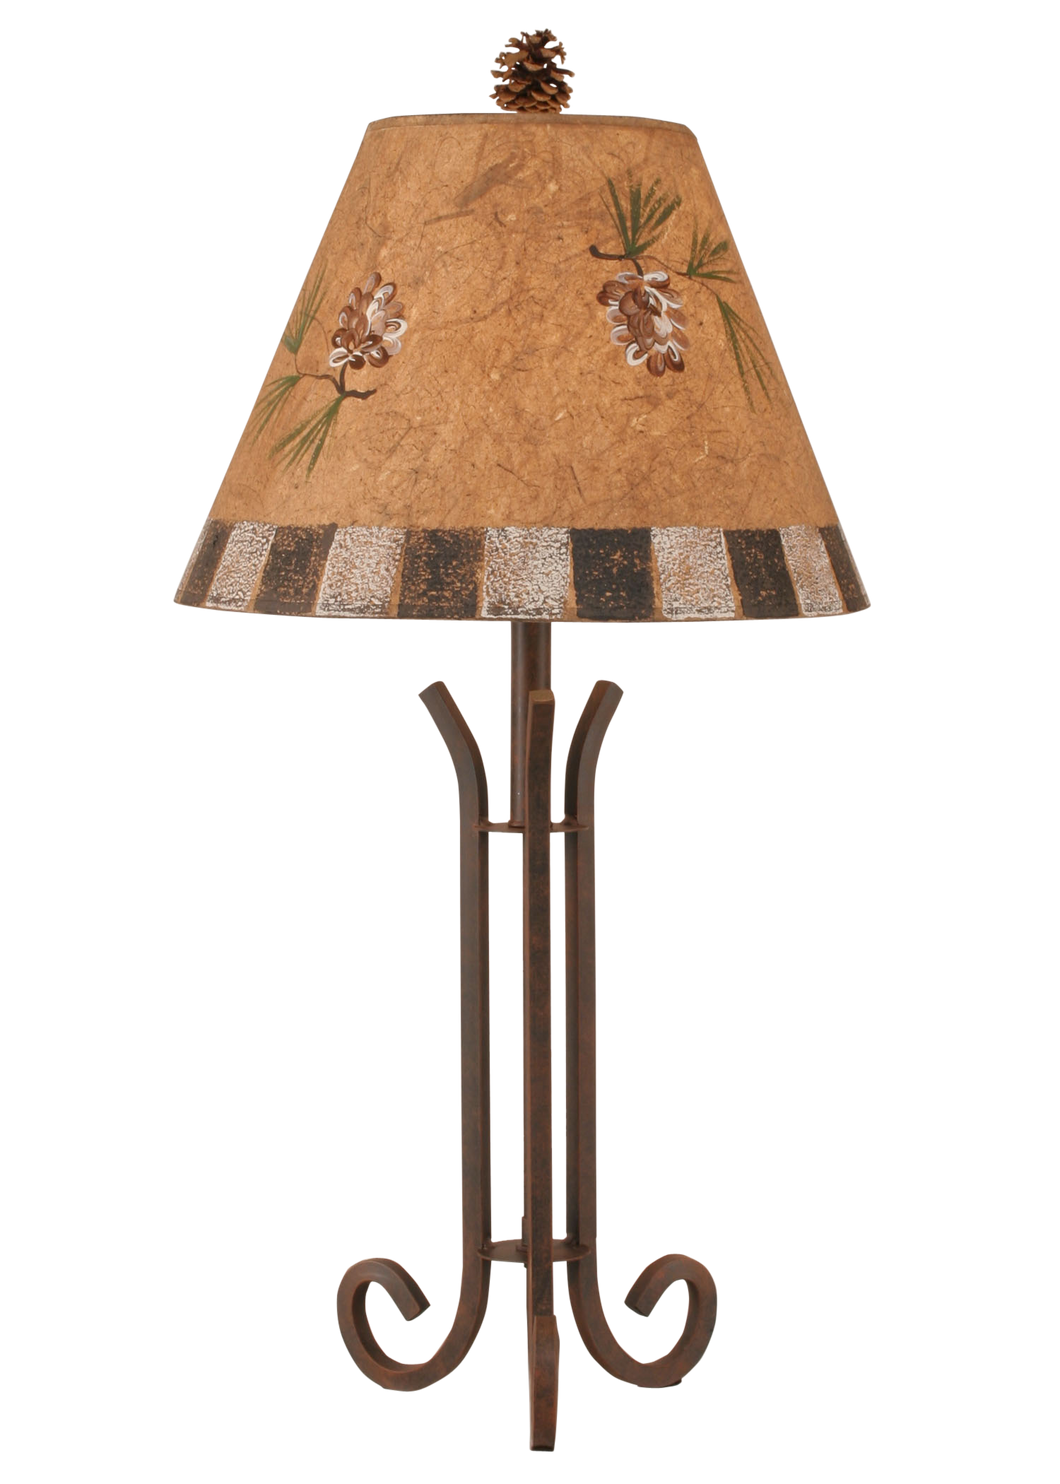 Rust Iron 3 Footed Accent Lamp w/ Pine Cone and Block Shade